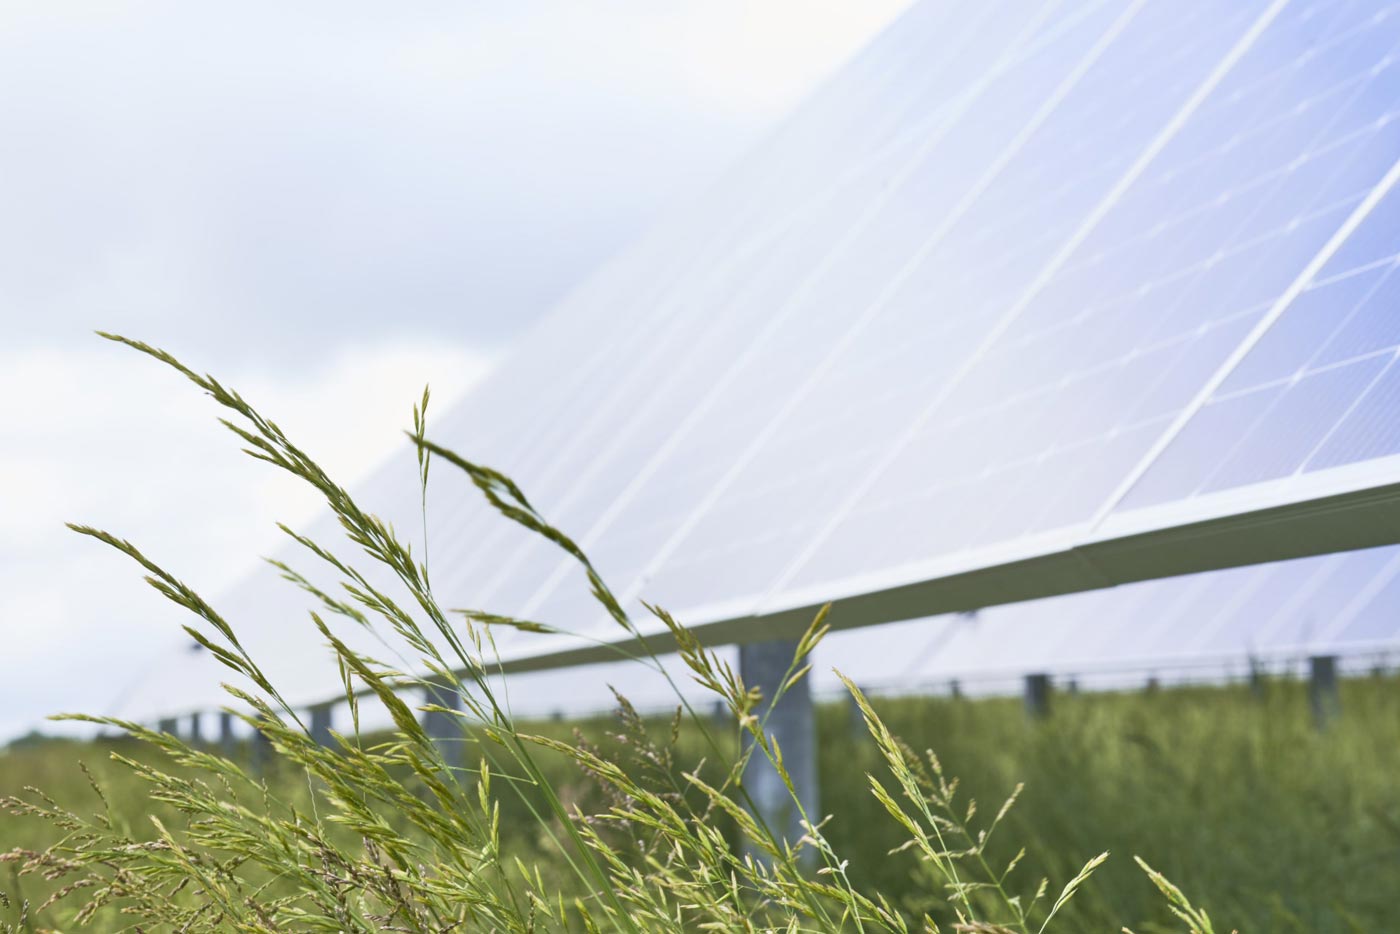 SOLAR FARM APPROVAL HERALDS HOME-GROWN ENERGY FOR UP TO 4,700 HOMES